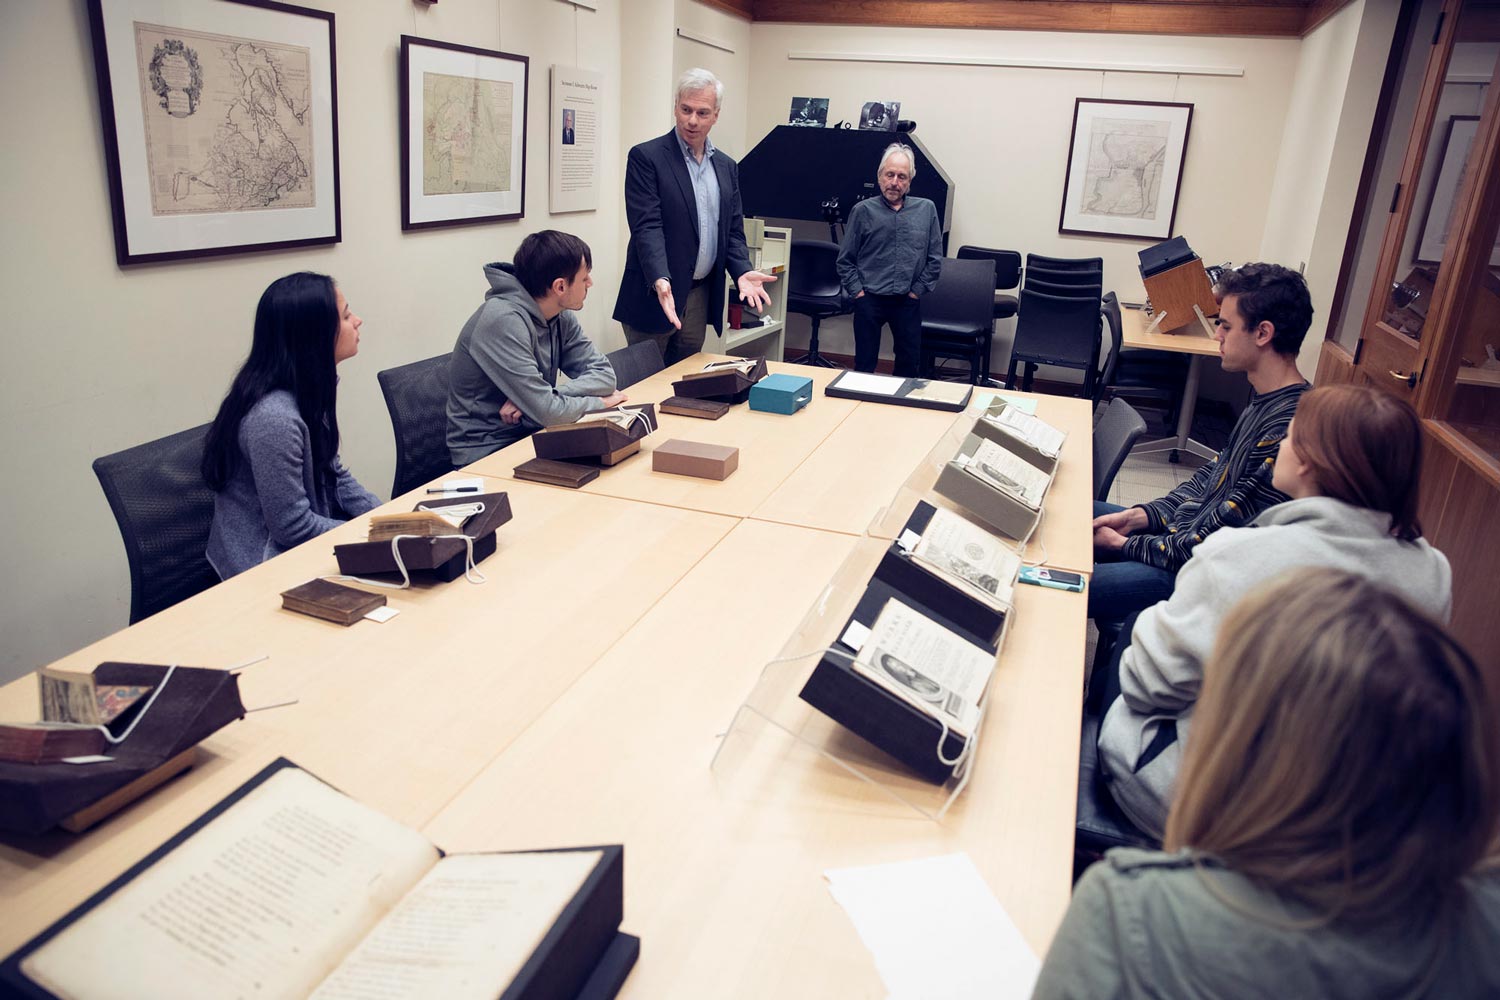 John O’Brien, standing, talking to his students with old books opened on the table